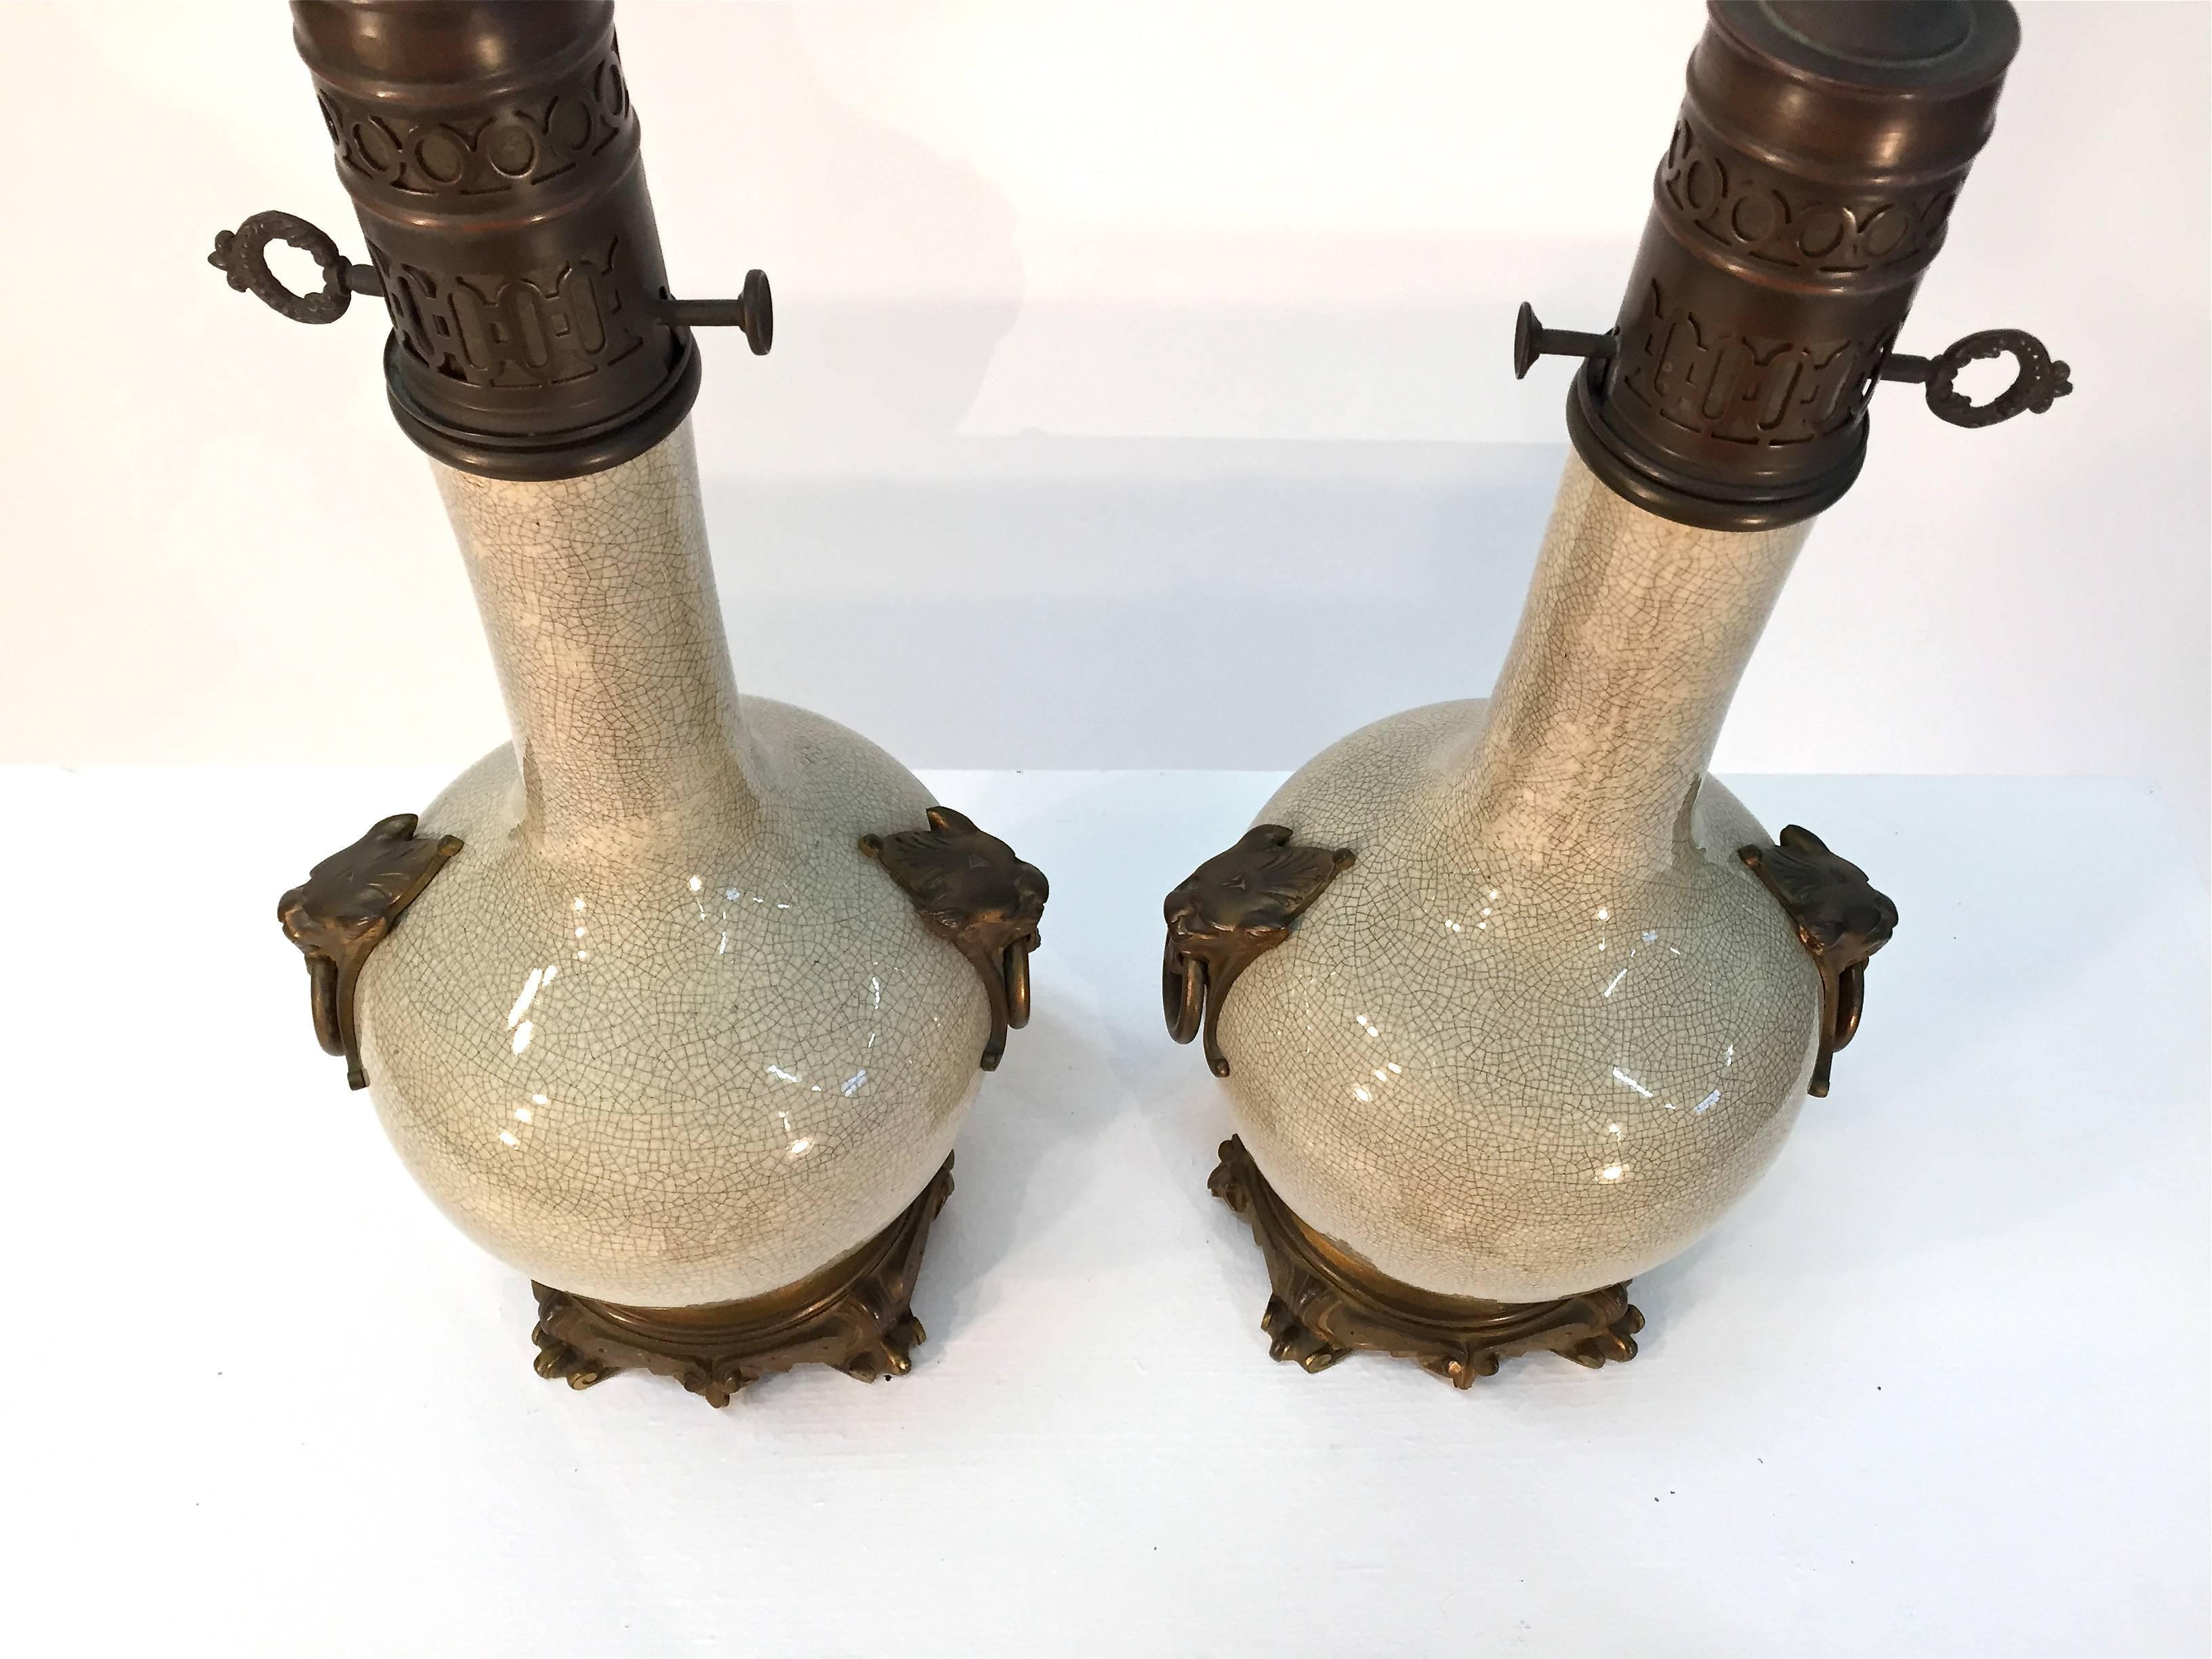 19th Century, French, Bronze-Mounted Crackle Glaze Ceramic Lamps For Sale 7